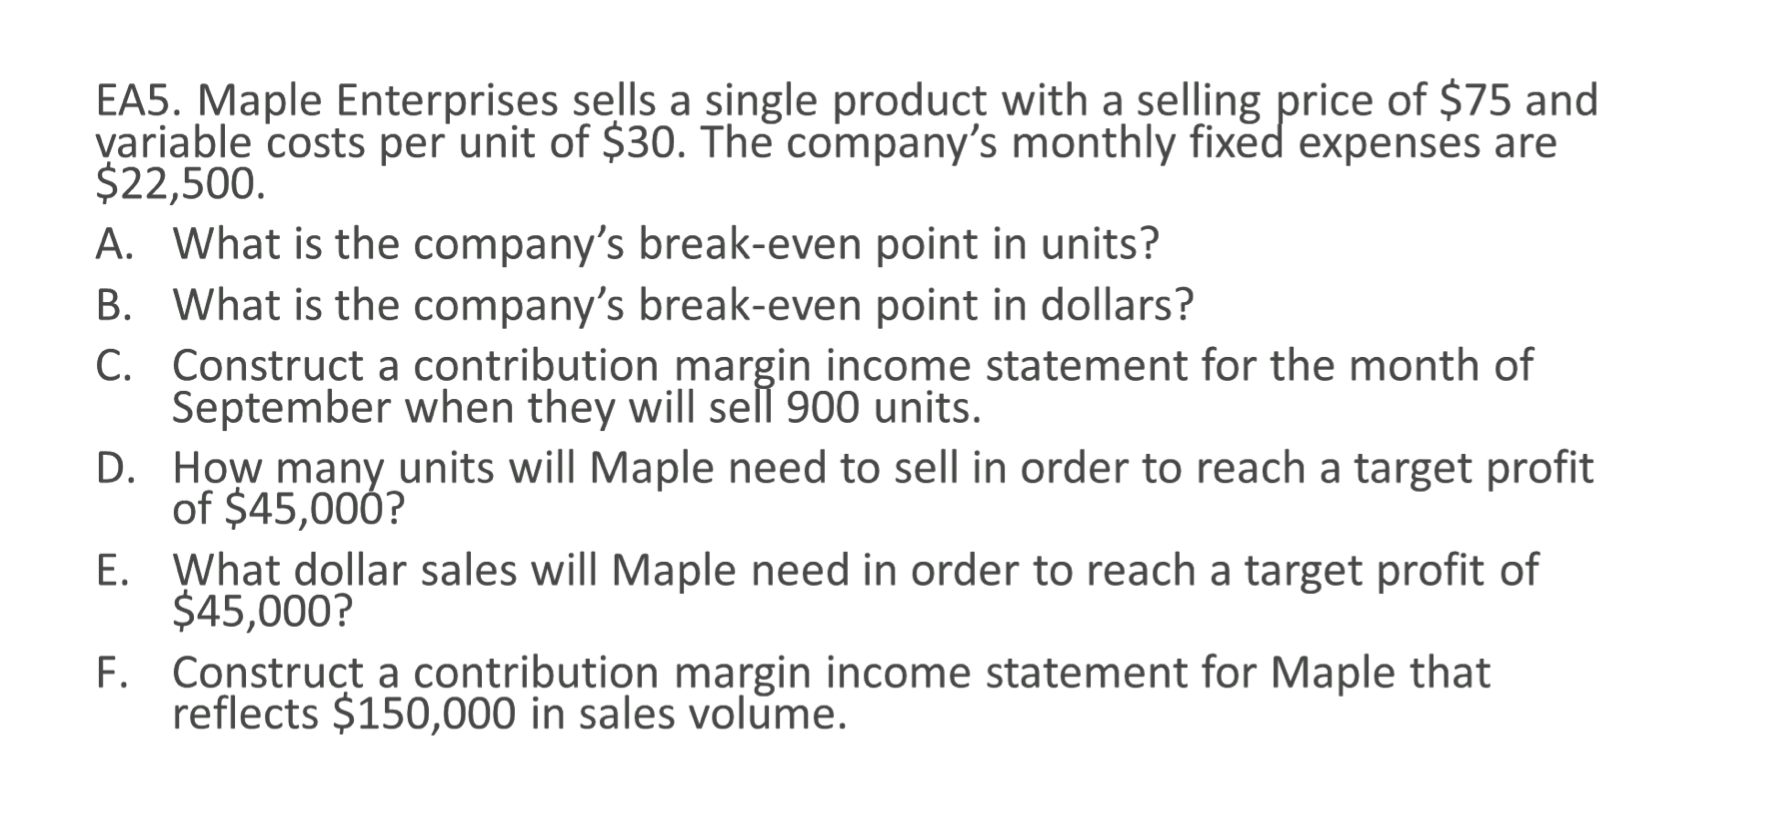 EA5. Maple Enterprises sells a single product with a selling price of $75 and
variable costs per unit of $30. The company's monthly fixed expenses are
$22,500.
What is the company's break-even point in units?
B. What is the company's break-even point in dollars?
С.
А.
C. Construct a contribution margin income statement for the month of
September when they will sel 900 units.
D. How many units will Maple need to sell in order to reach a target profit
of $45,000?
E. What dollar sales will Maple need in order to reach a target profit of
$45,000?
F. Construct a contribution margin income statement for Maple that
reflects $150,000 in sales volume.
Е.
